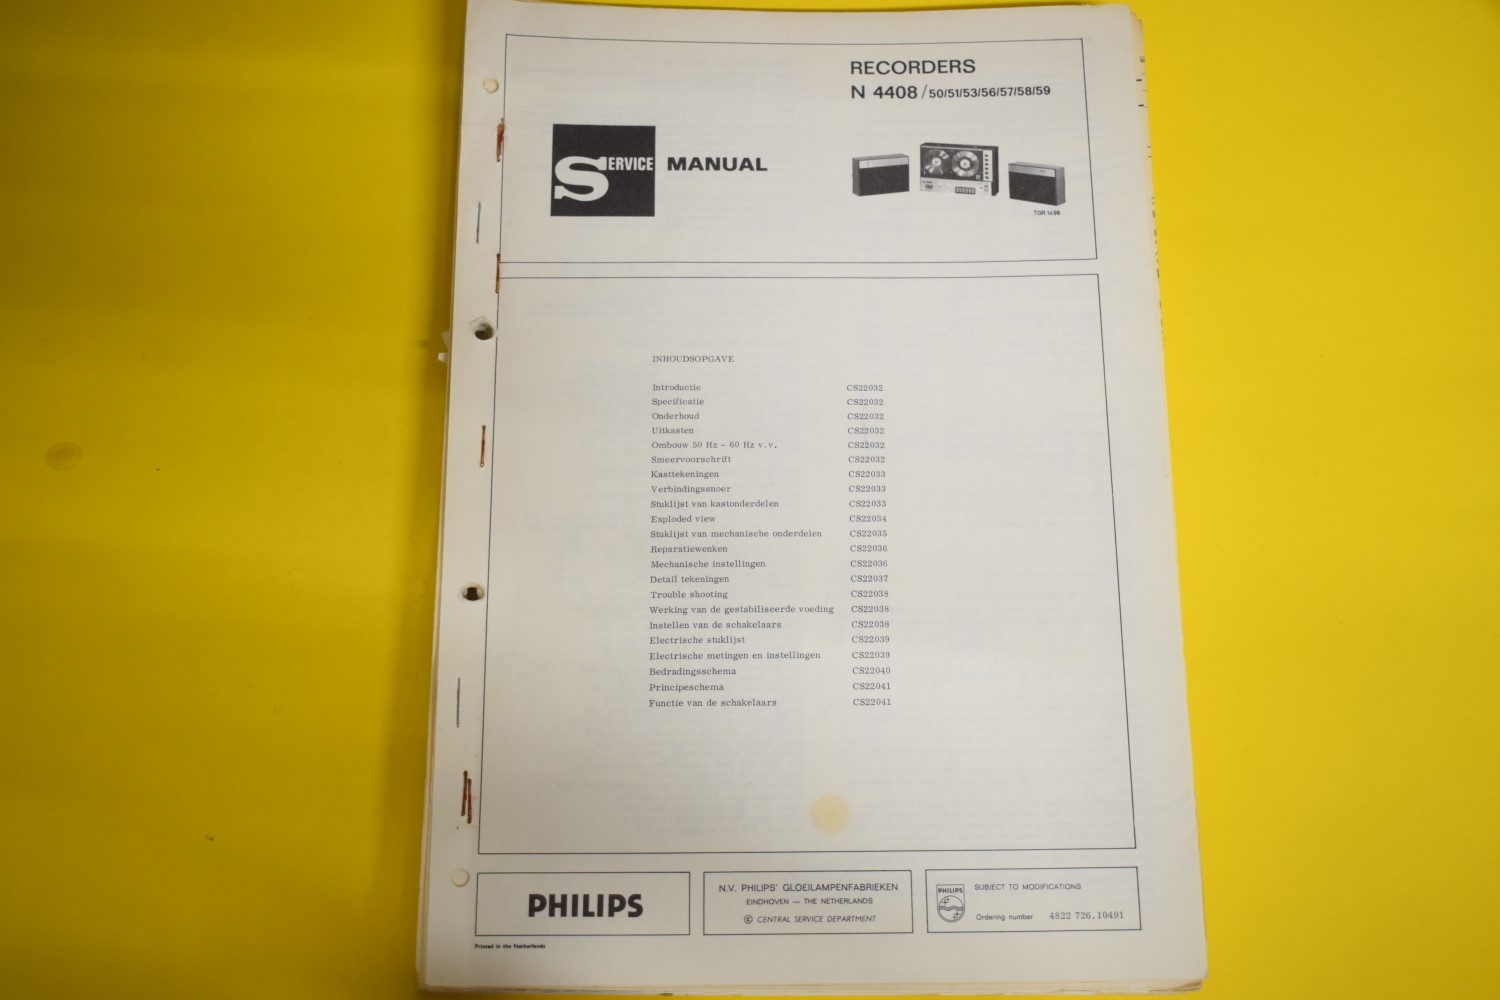 Philips N4408 Tape Recorder Service Manual – Dutch